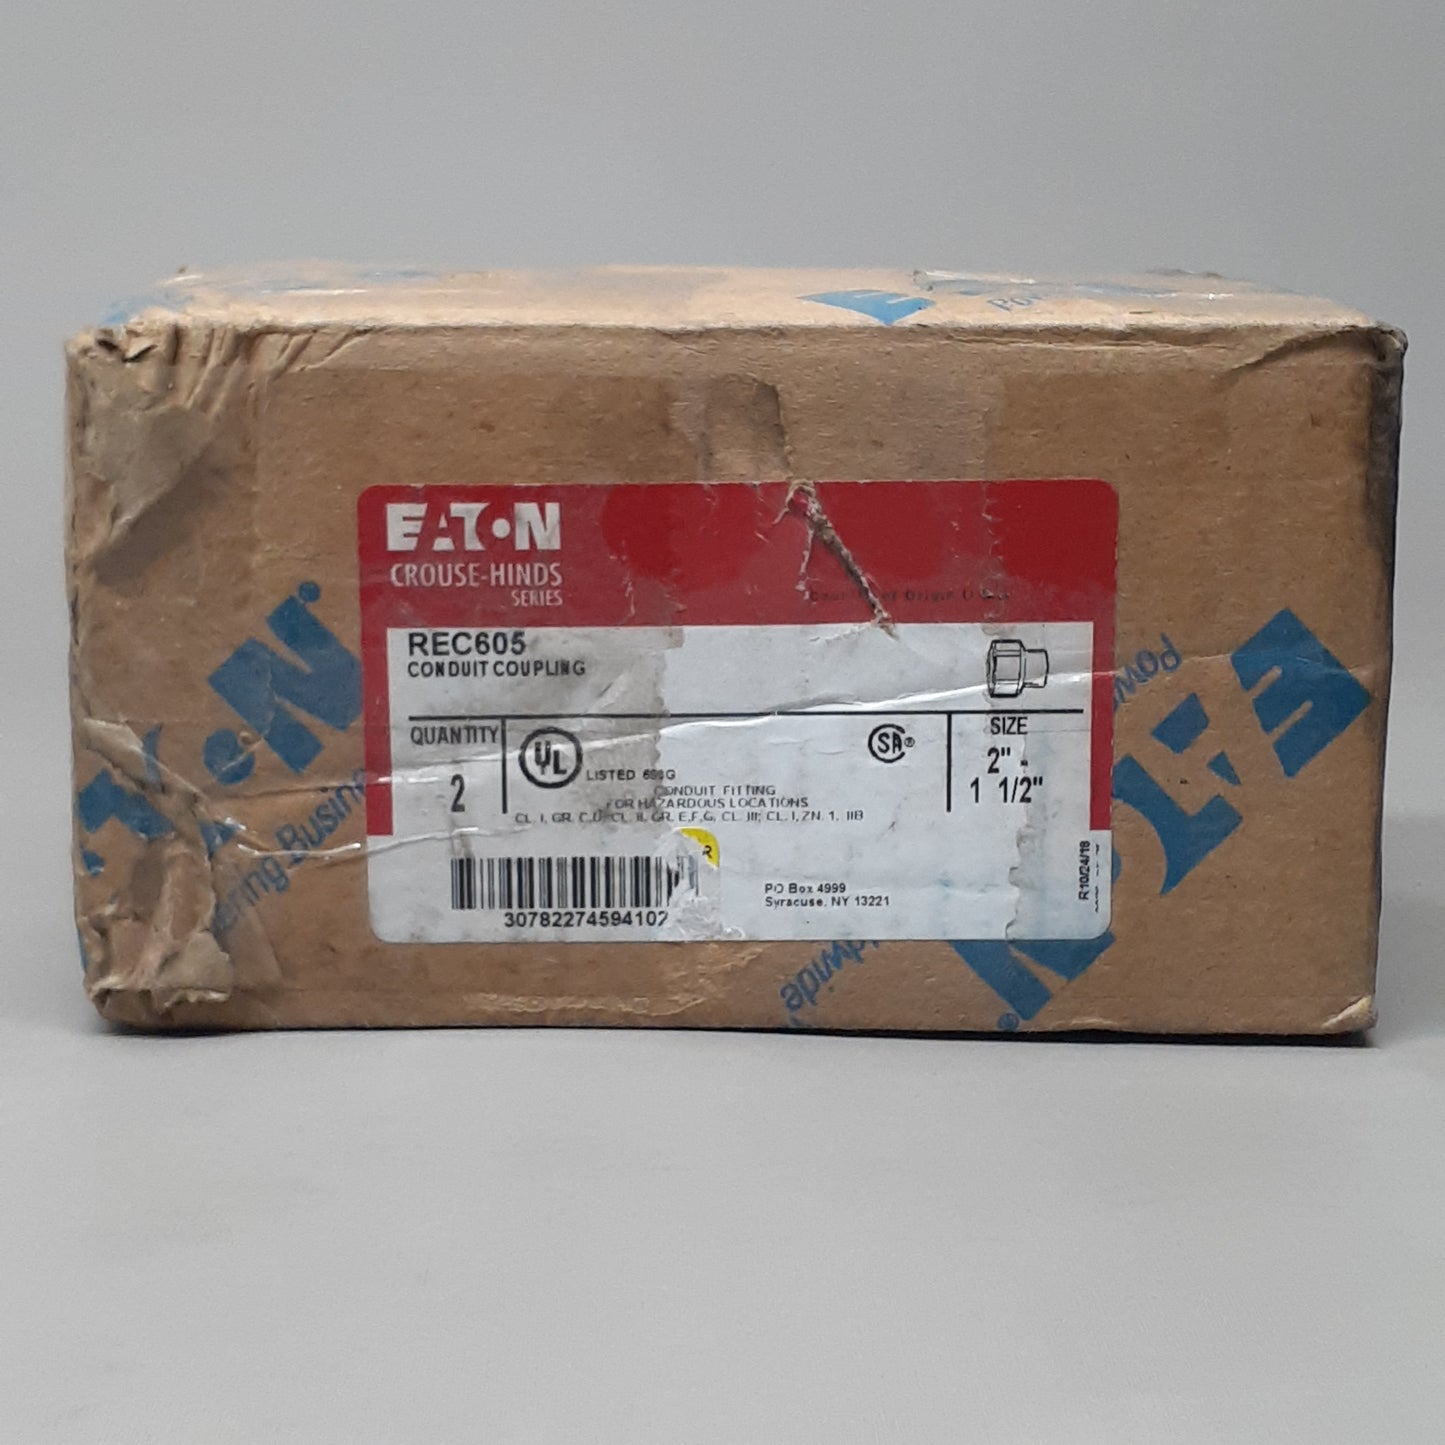 EATON CROUSE HINDS 2 PK! Explosion-Proof Reducing Conduit Coupling Feraloy Iron Alloy (New)